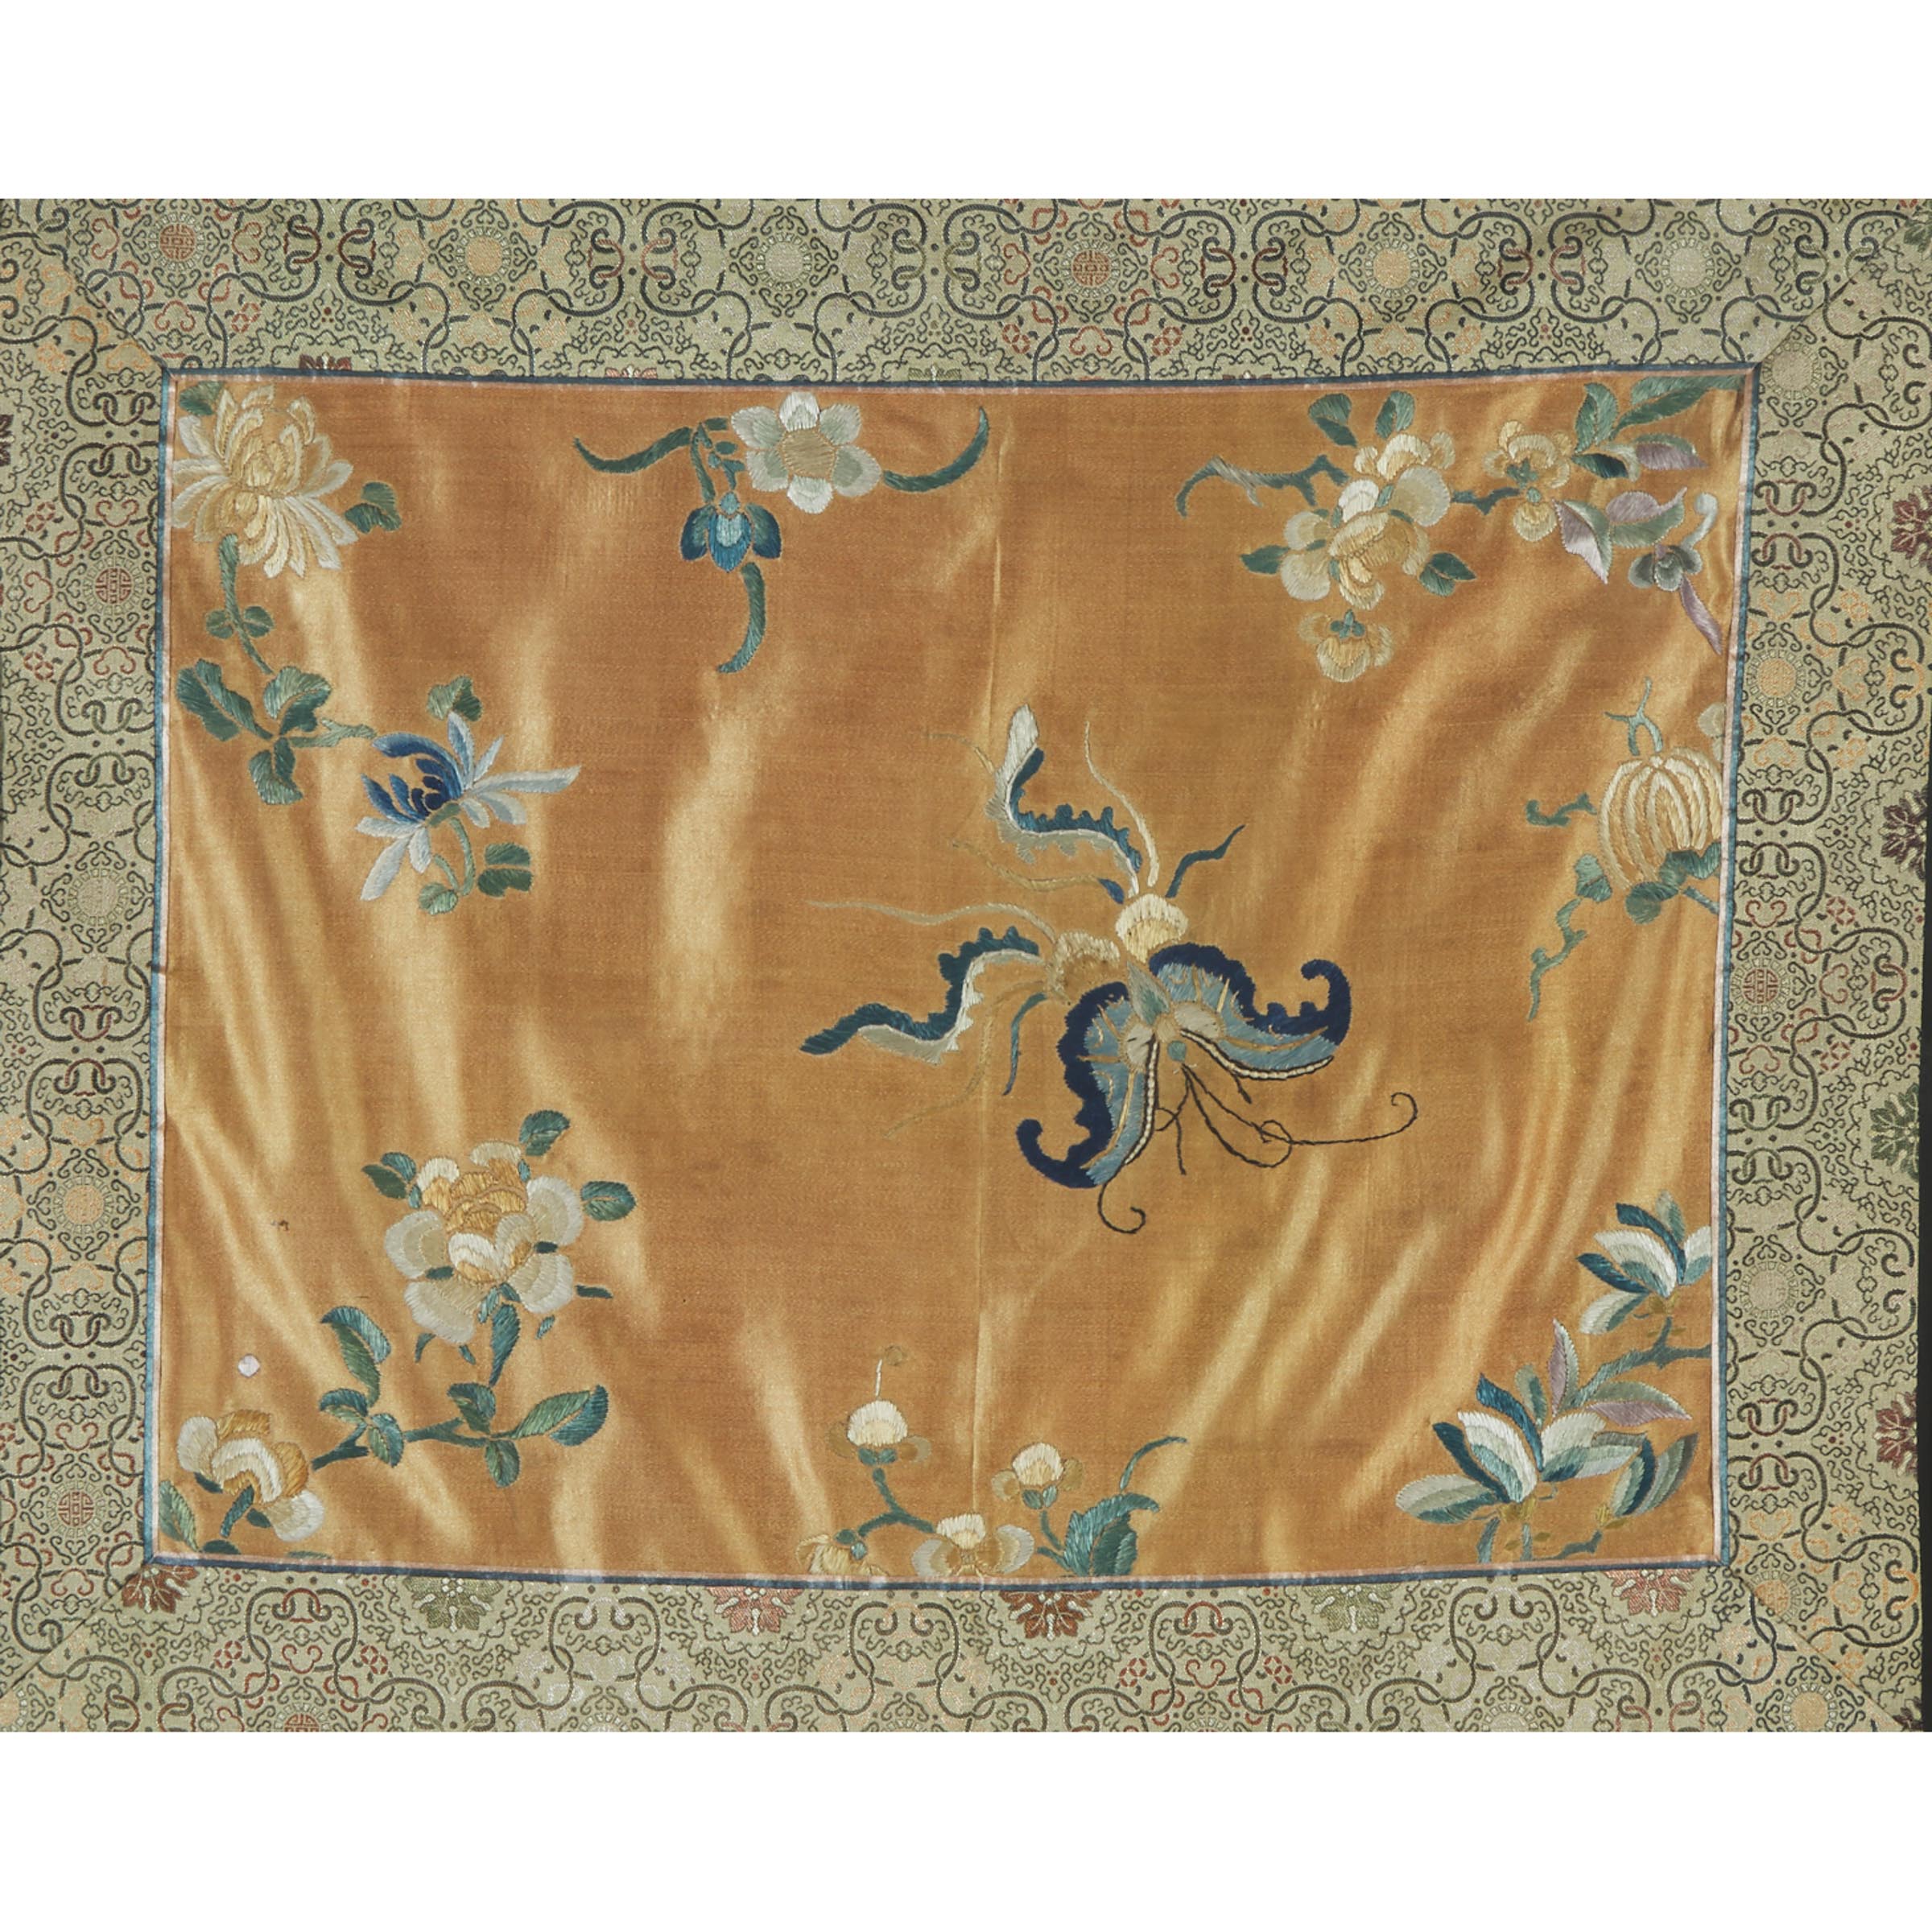 An Embroidered Silk Panel of a Butterfly and Flowers, Late Qing Dynasty